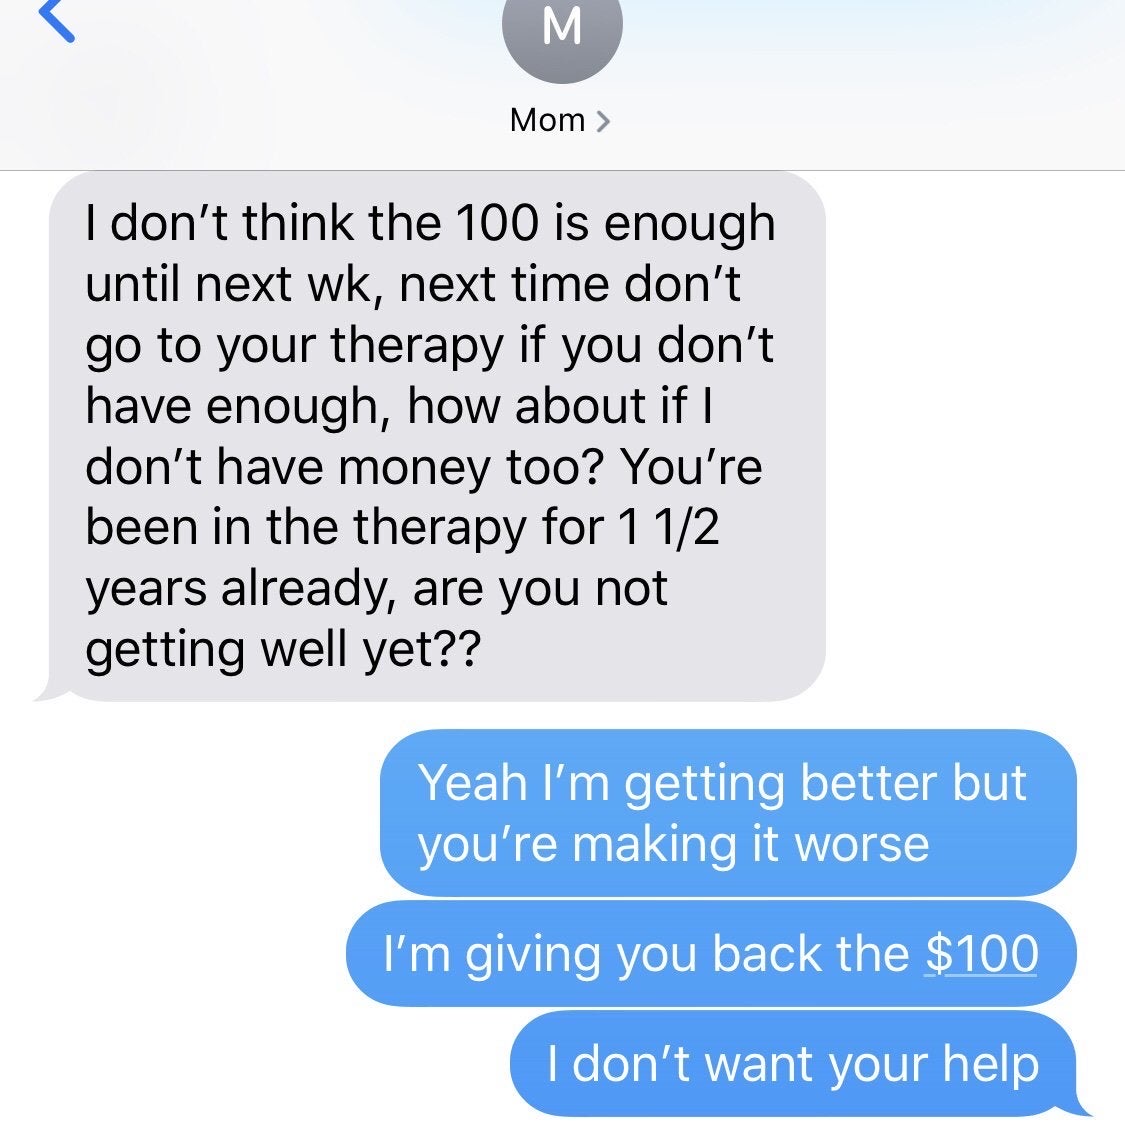 insane parents texts - M Mom > I don't think the 100 is enough until next wk, next time don't go to your therapy if you don't have enough, how about if I don't have money too? You're been in the therapy for 1 12 years already, are you not getting well yet